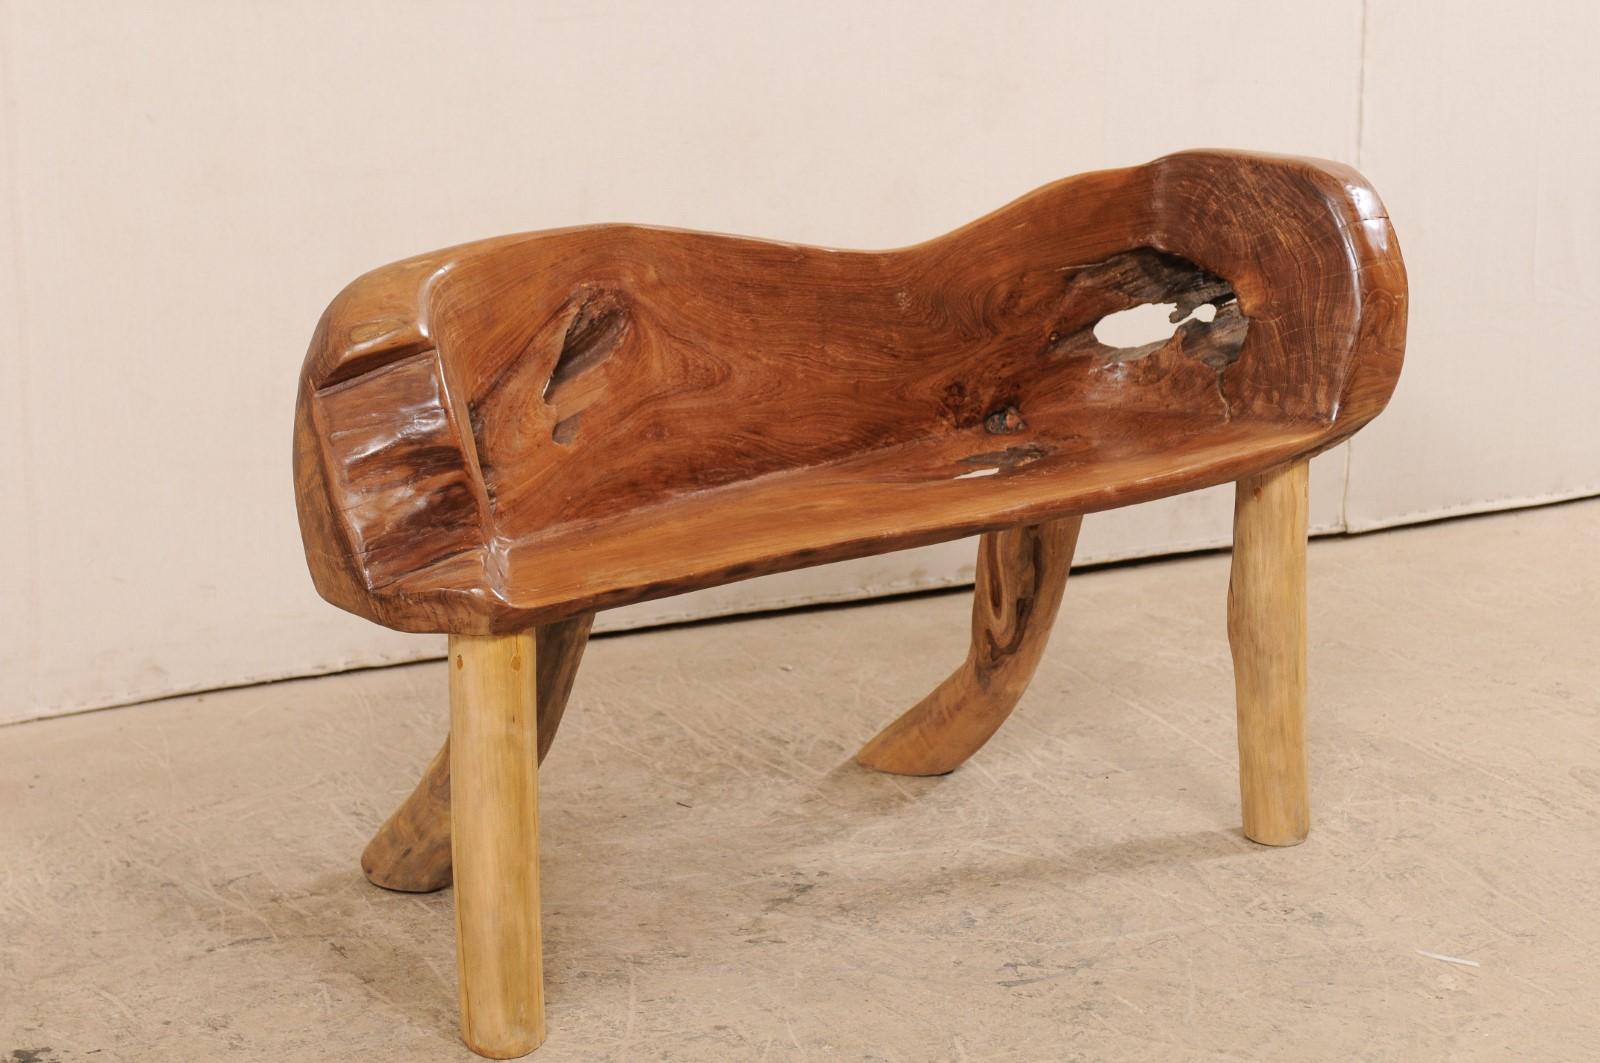 A natural teak wood bench with live edges. This cute little bench, just over four feet in length, has been created from the root and limbs of Indonesian teak wood, which has been smoothed and polished. Teak is a tropical hardwood which is